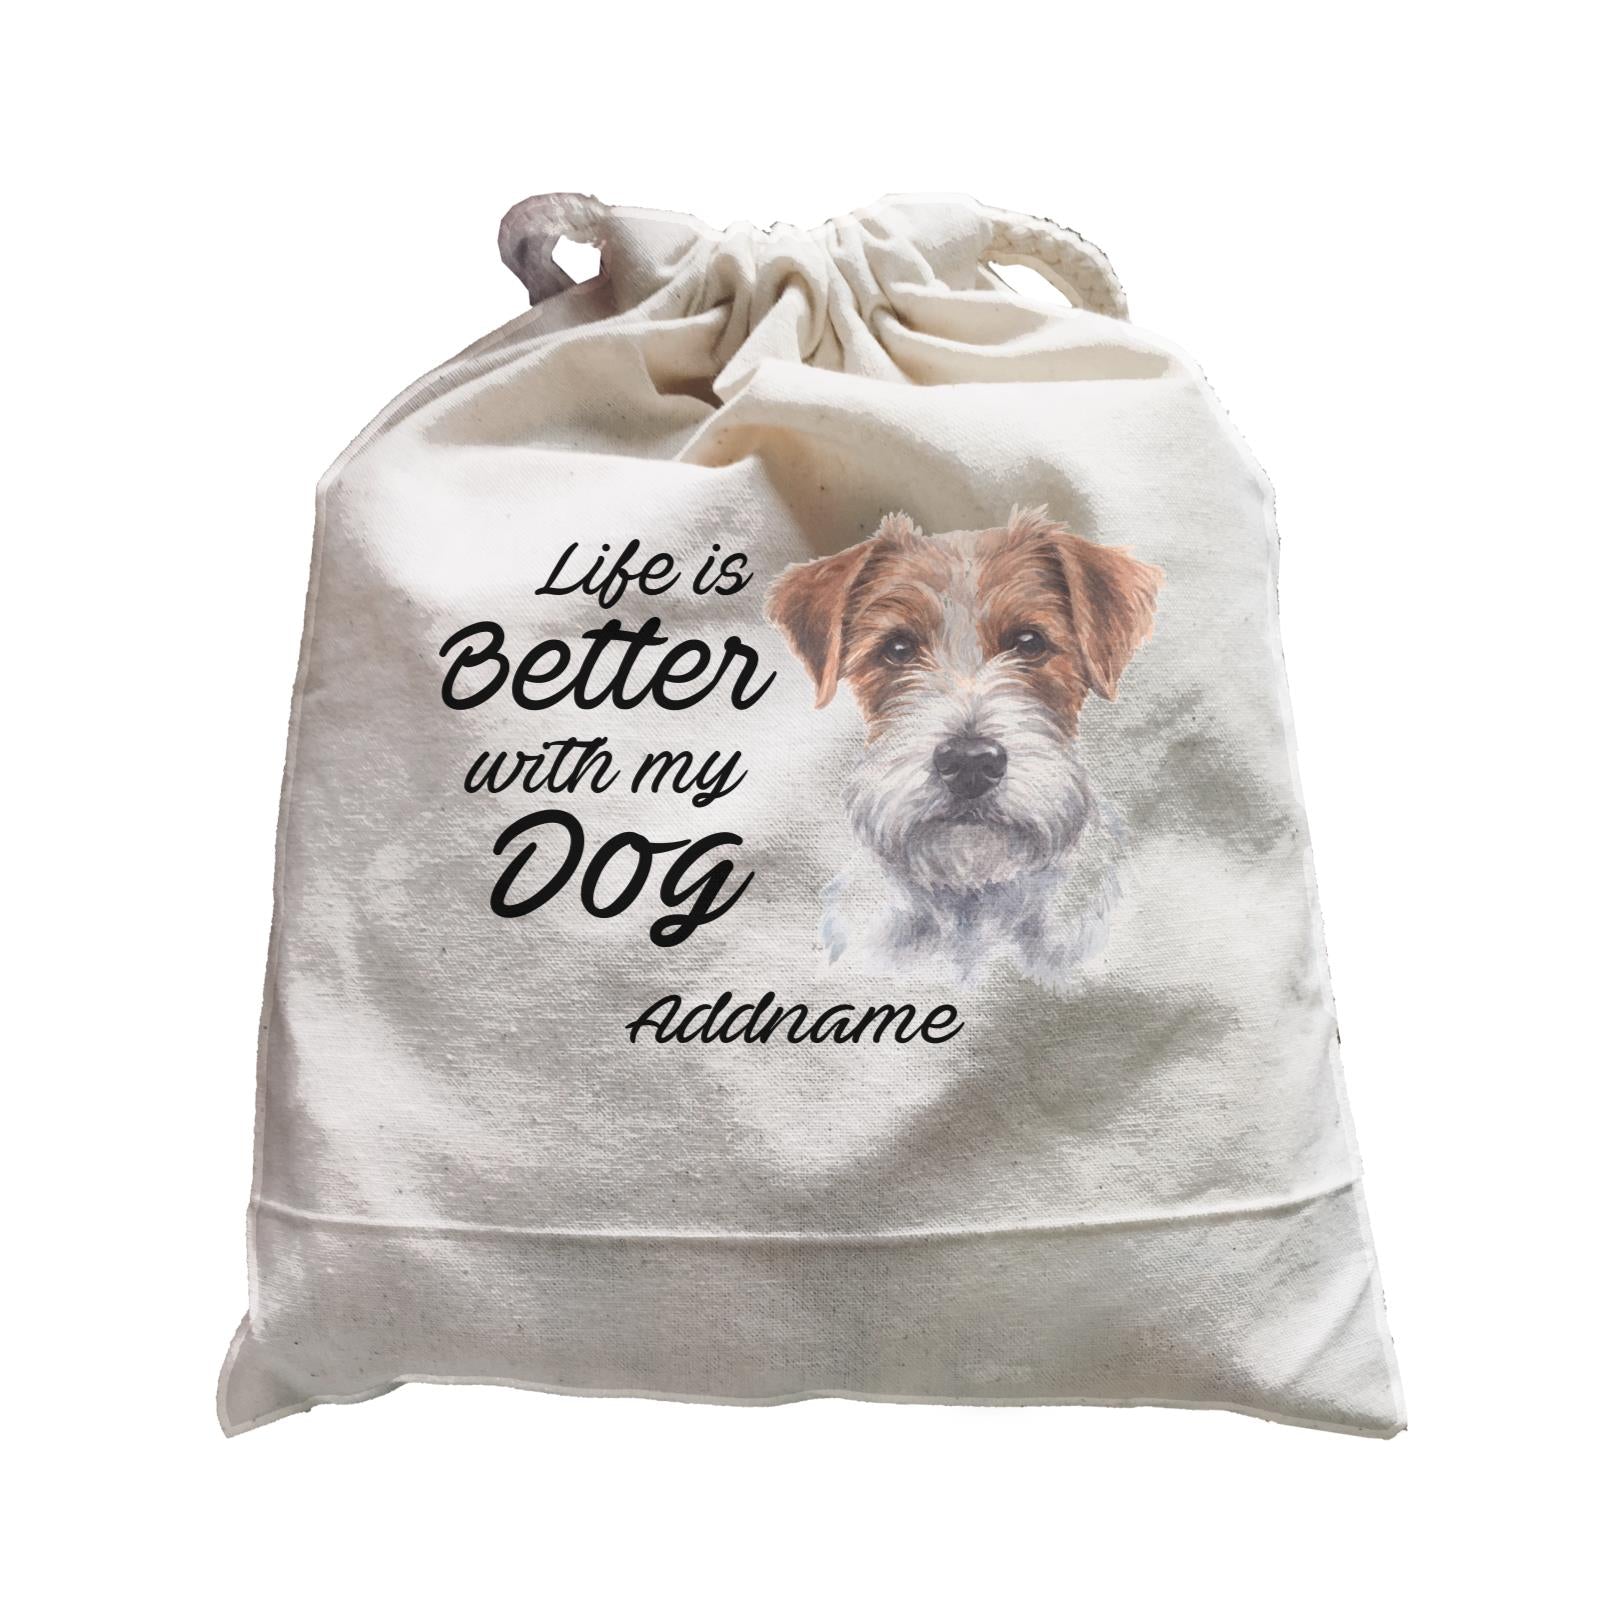 Watercolor Life is Better With My Dog Jack Russell Long Hair Addname Satchel